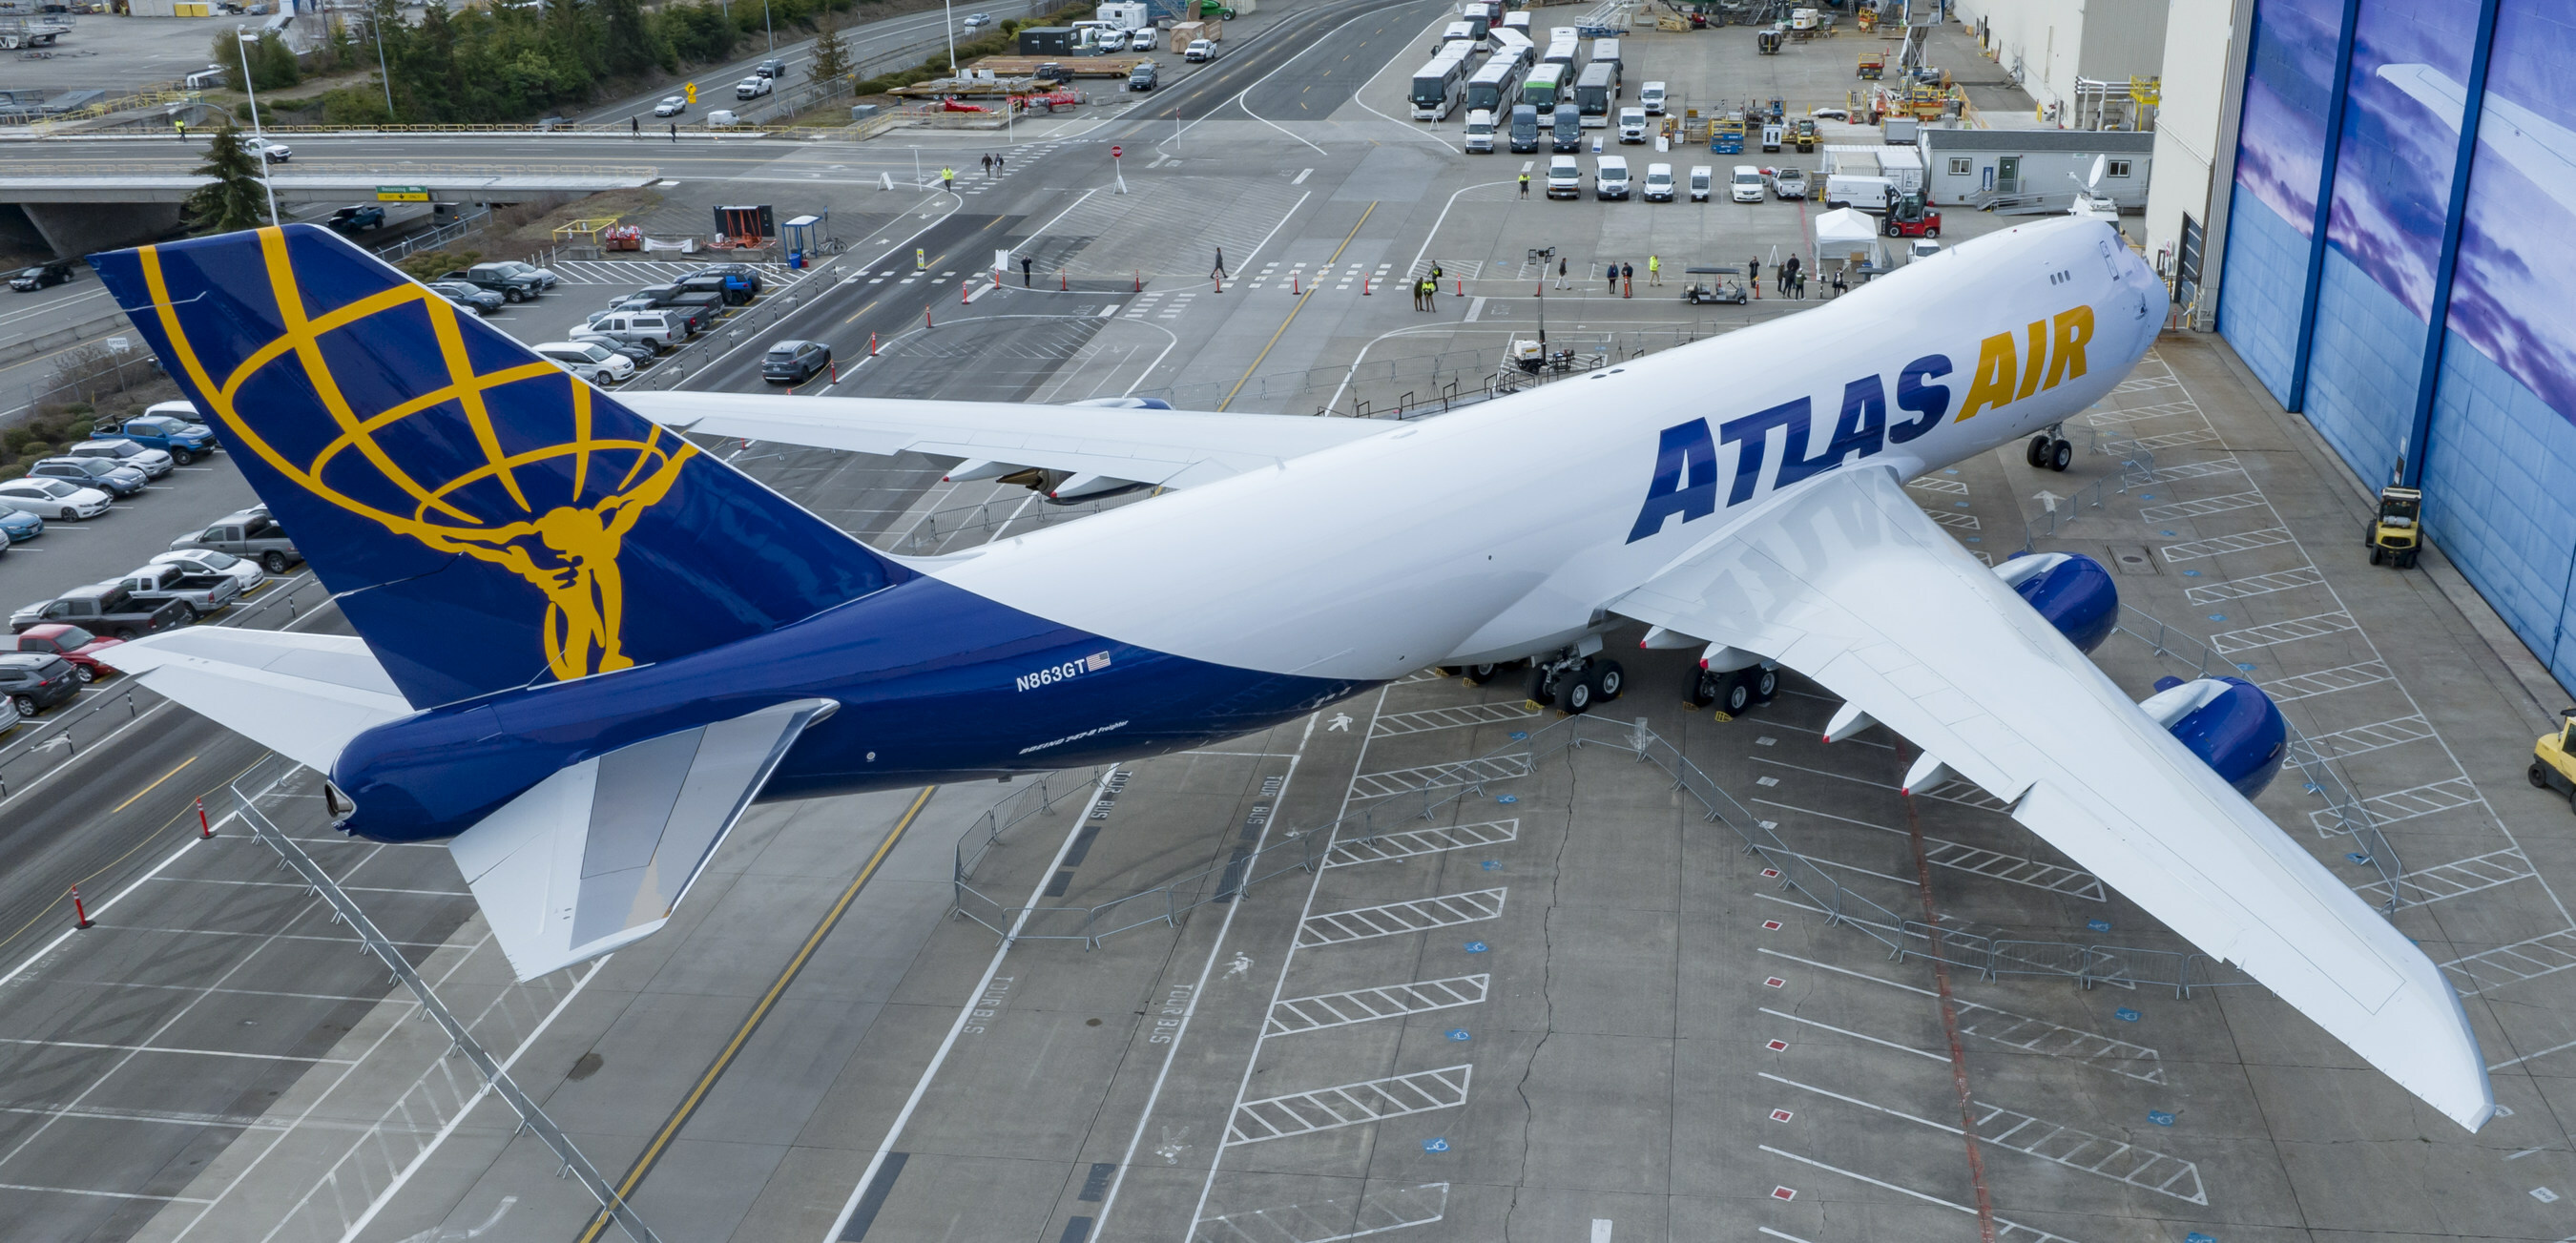 Boeing delivers the last 747 to be built